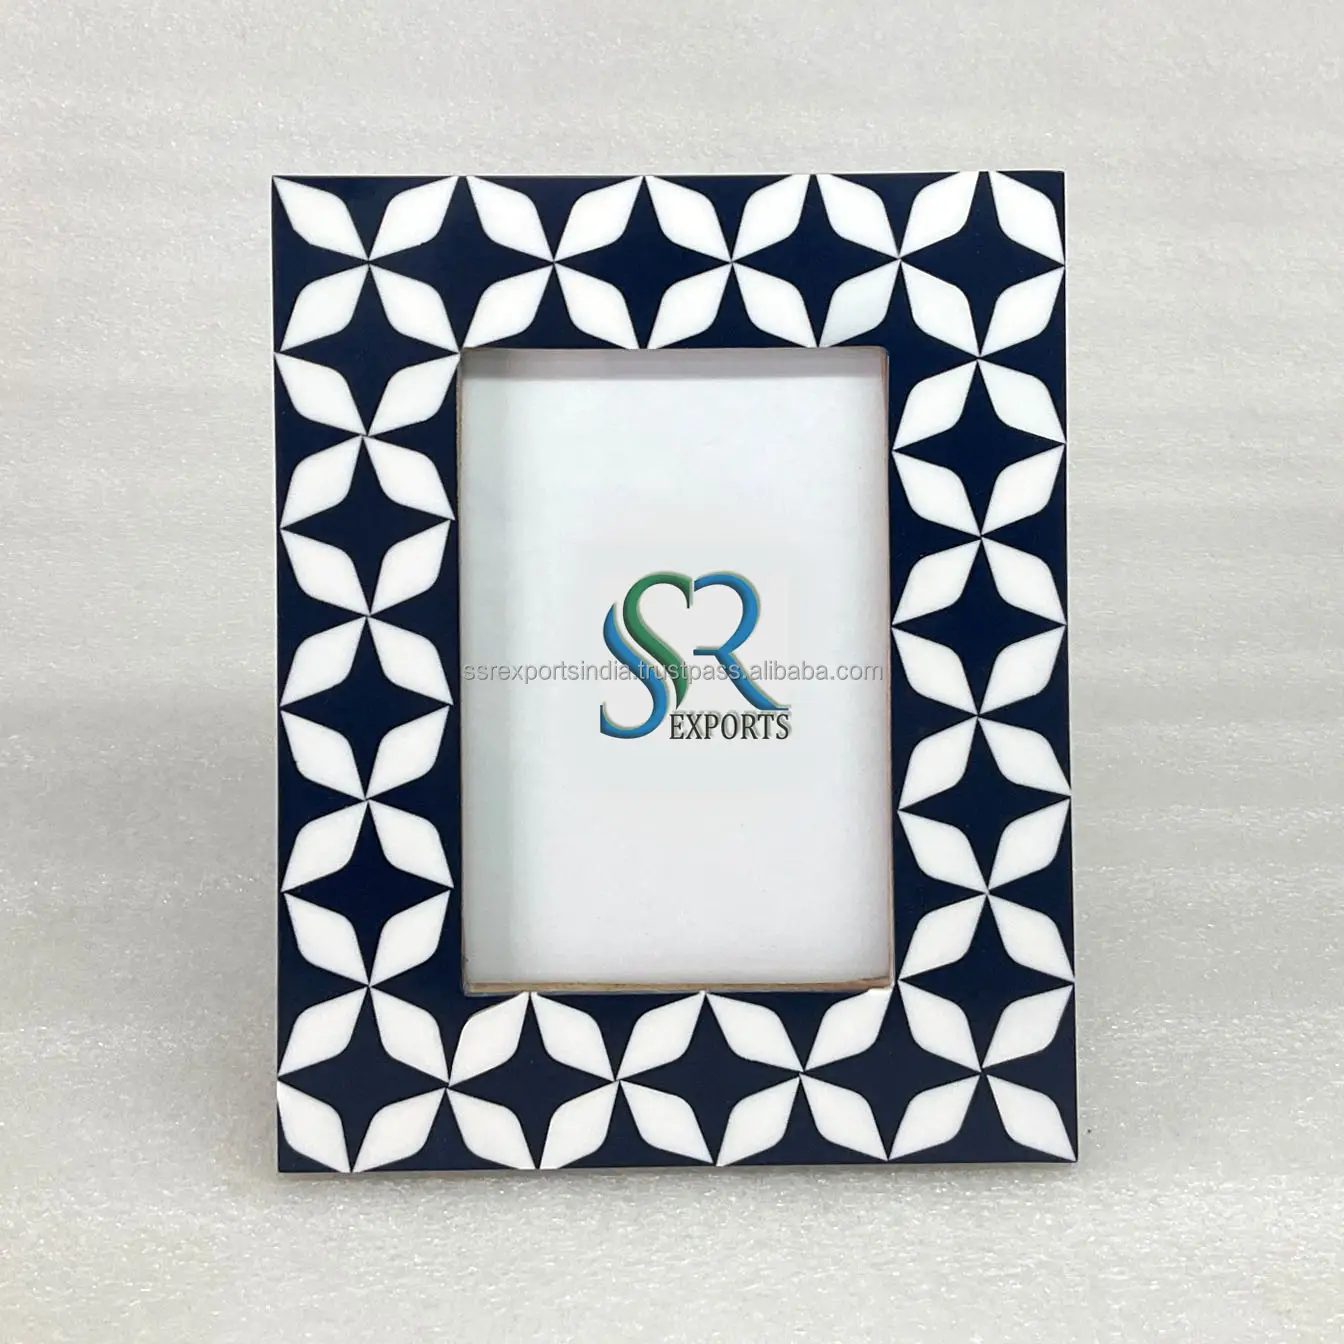 Top Quality Indian Handmade Inlay Resin Picture Photo Frame For Home Hotel Decorative Bone Inlay Photo Frame